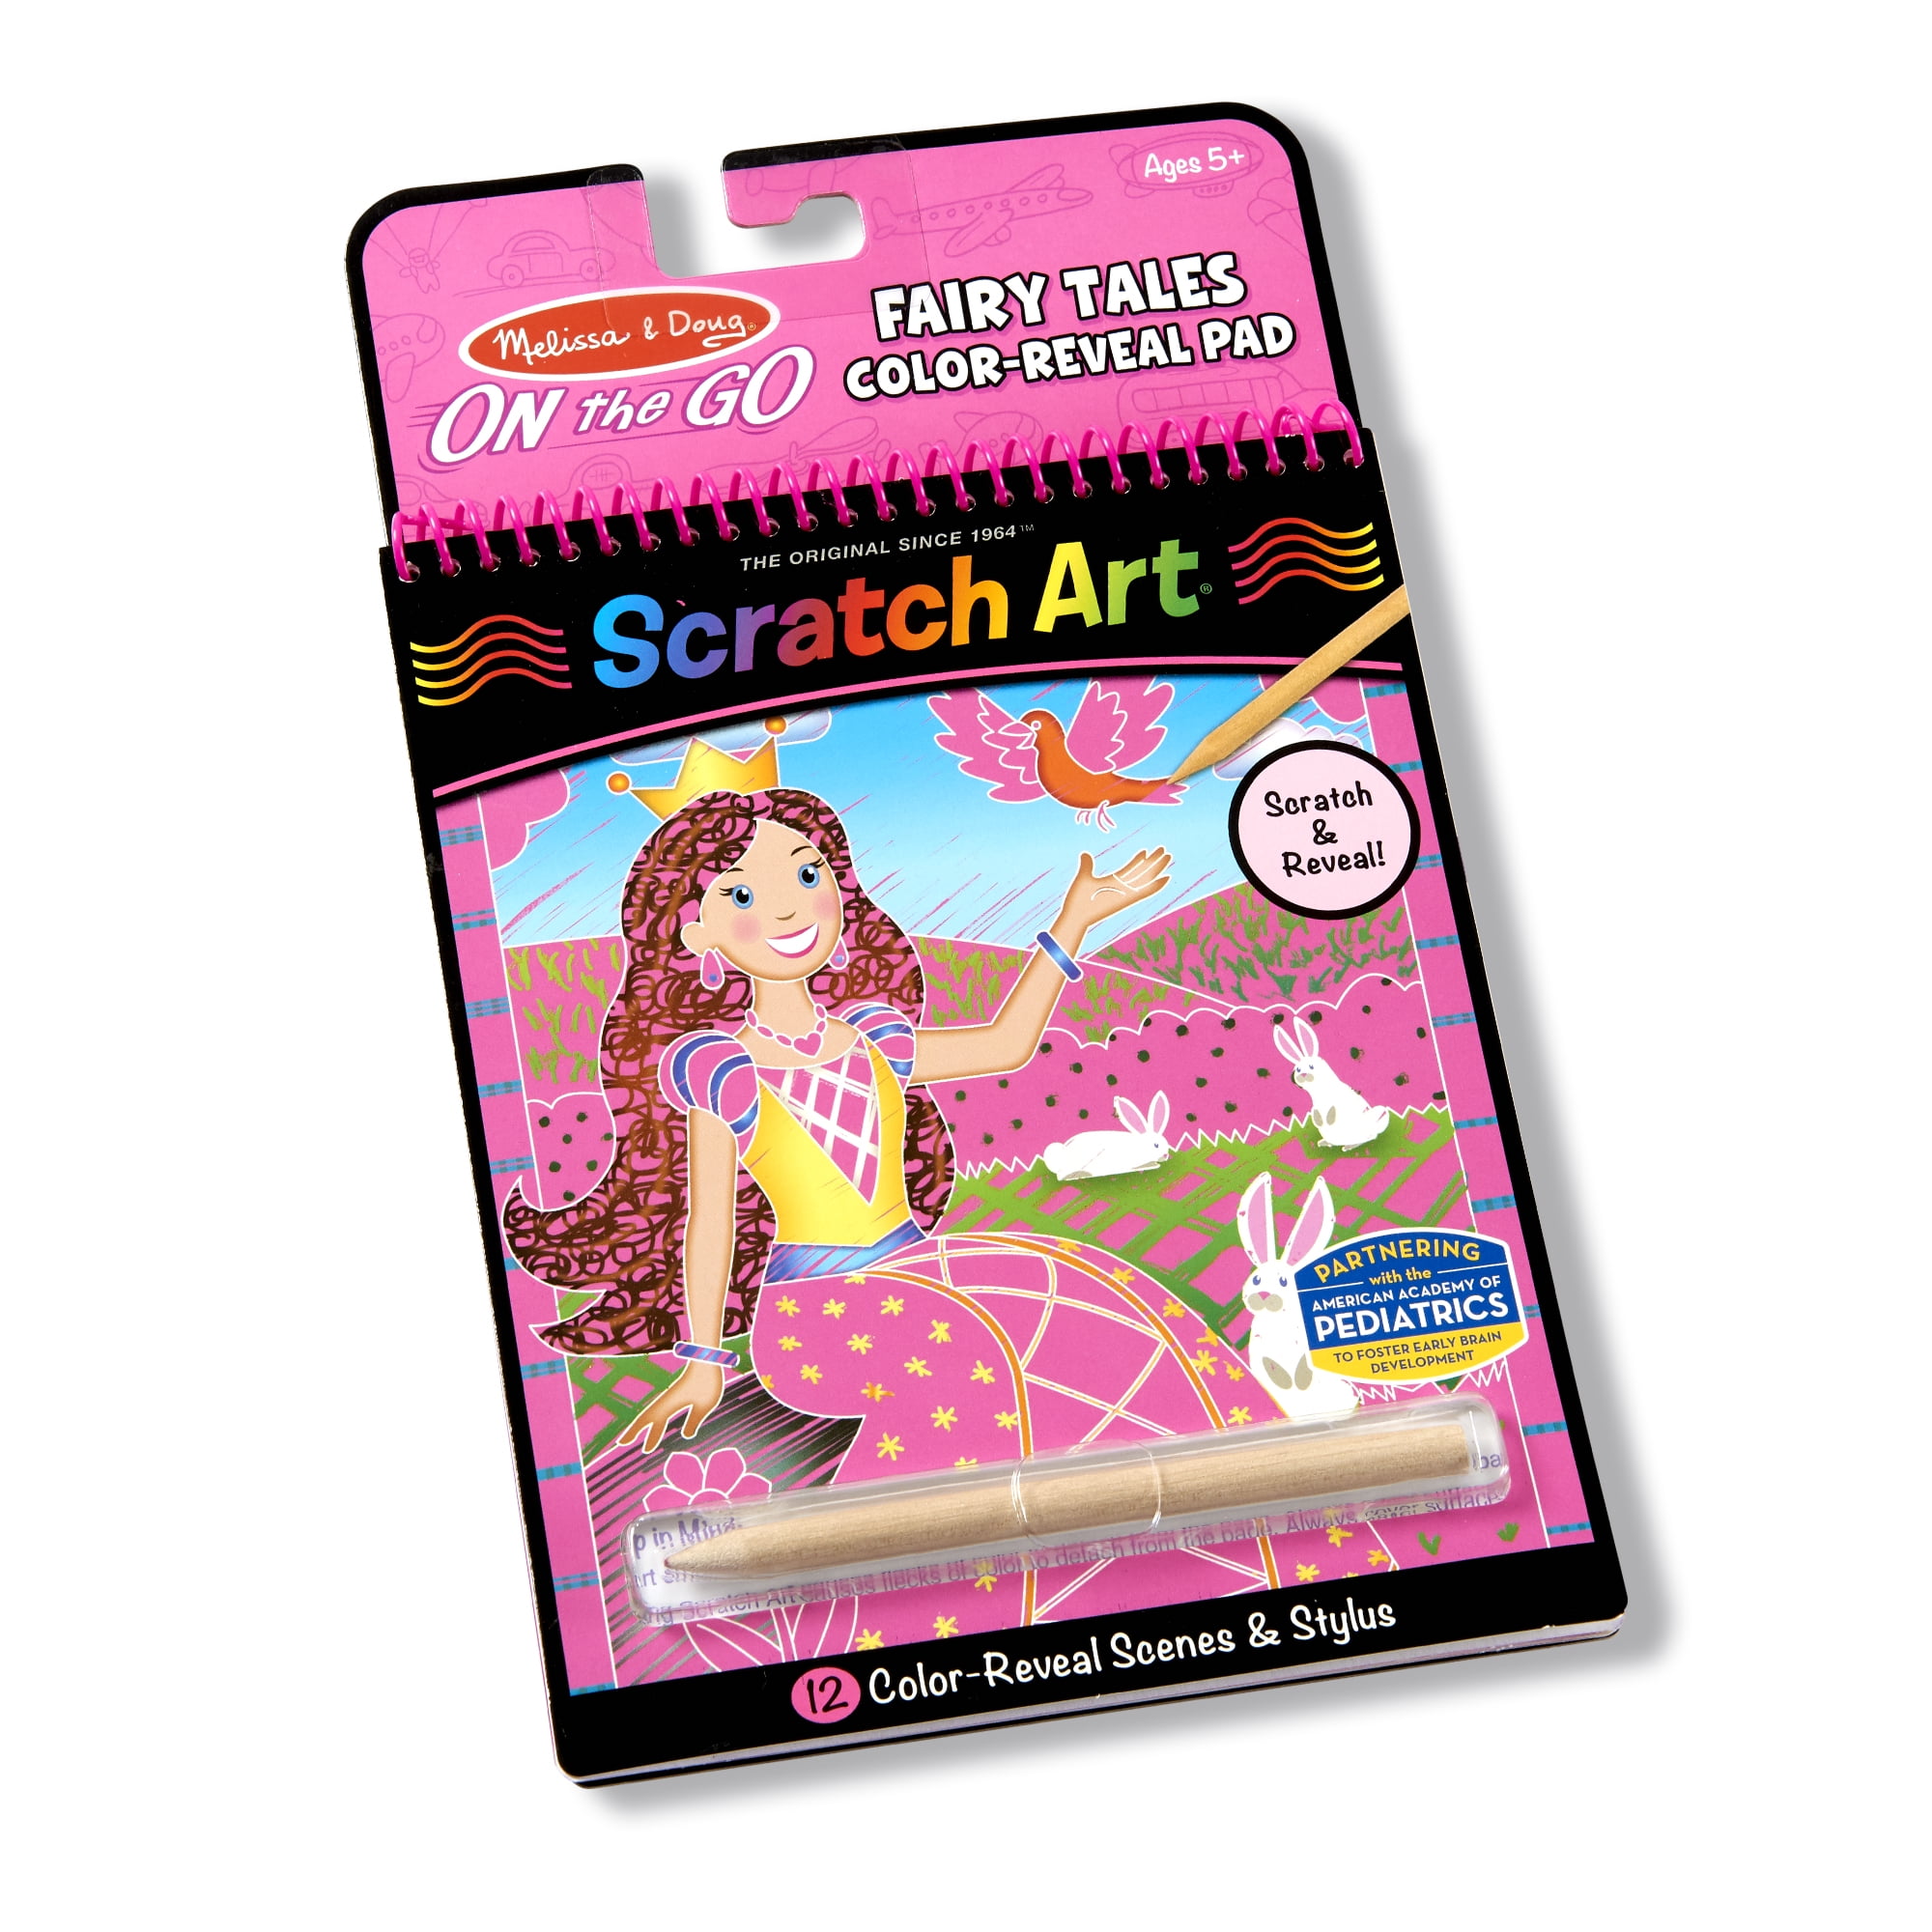  Melissa & Doug On the Go Magicolor Coloring Pad - Princess (18  Pages) : Arts, Crafts & Sewing